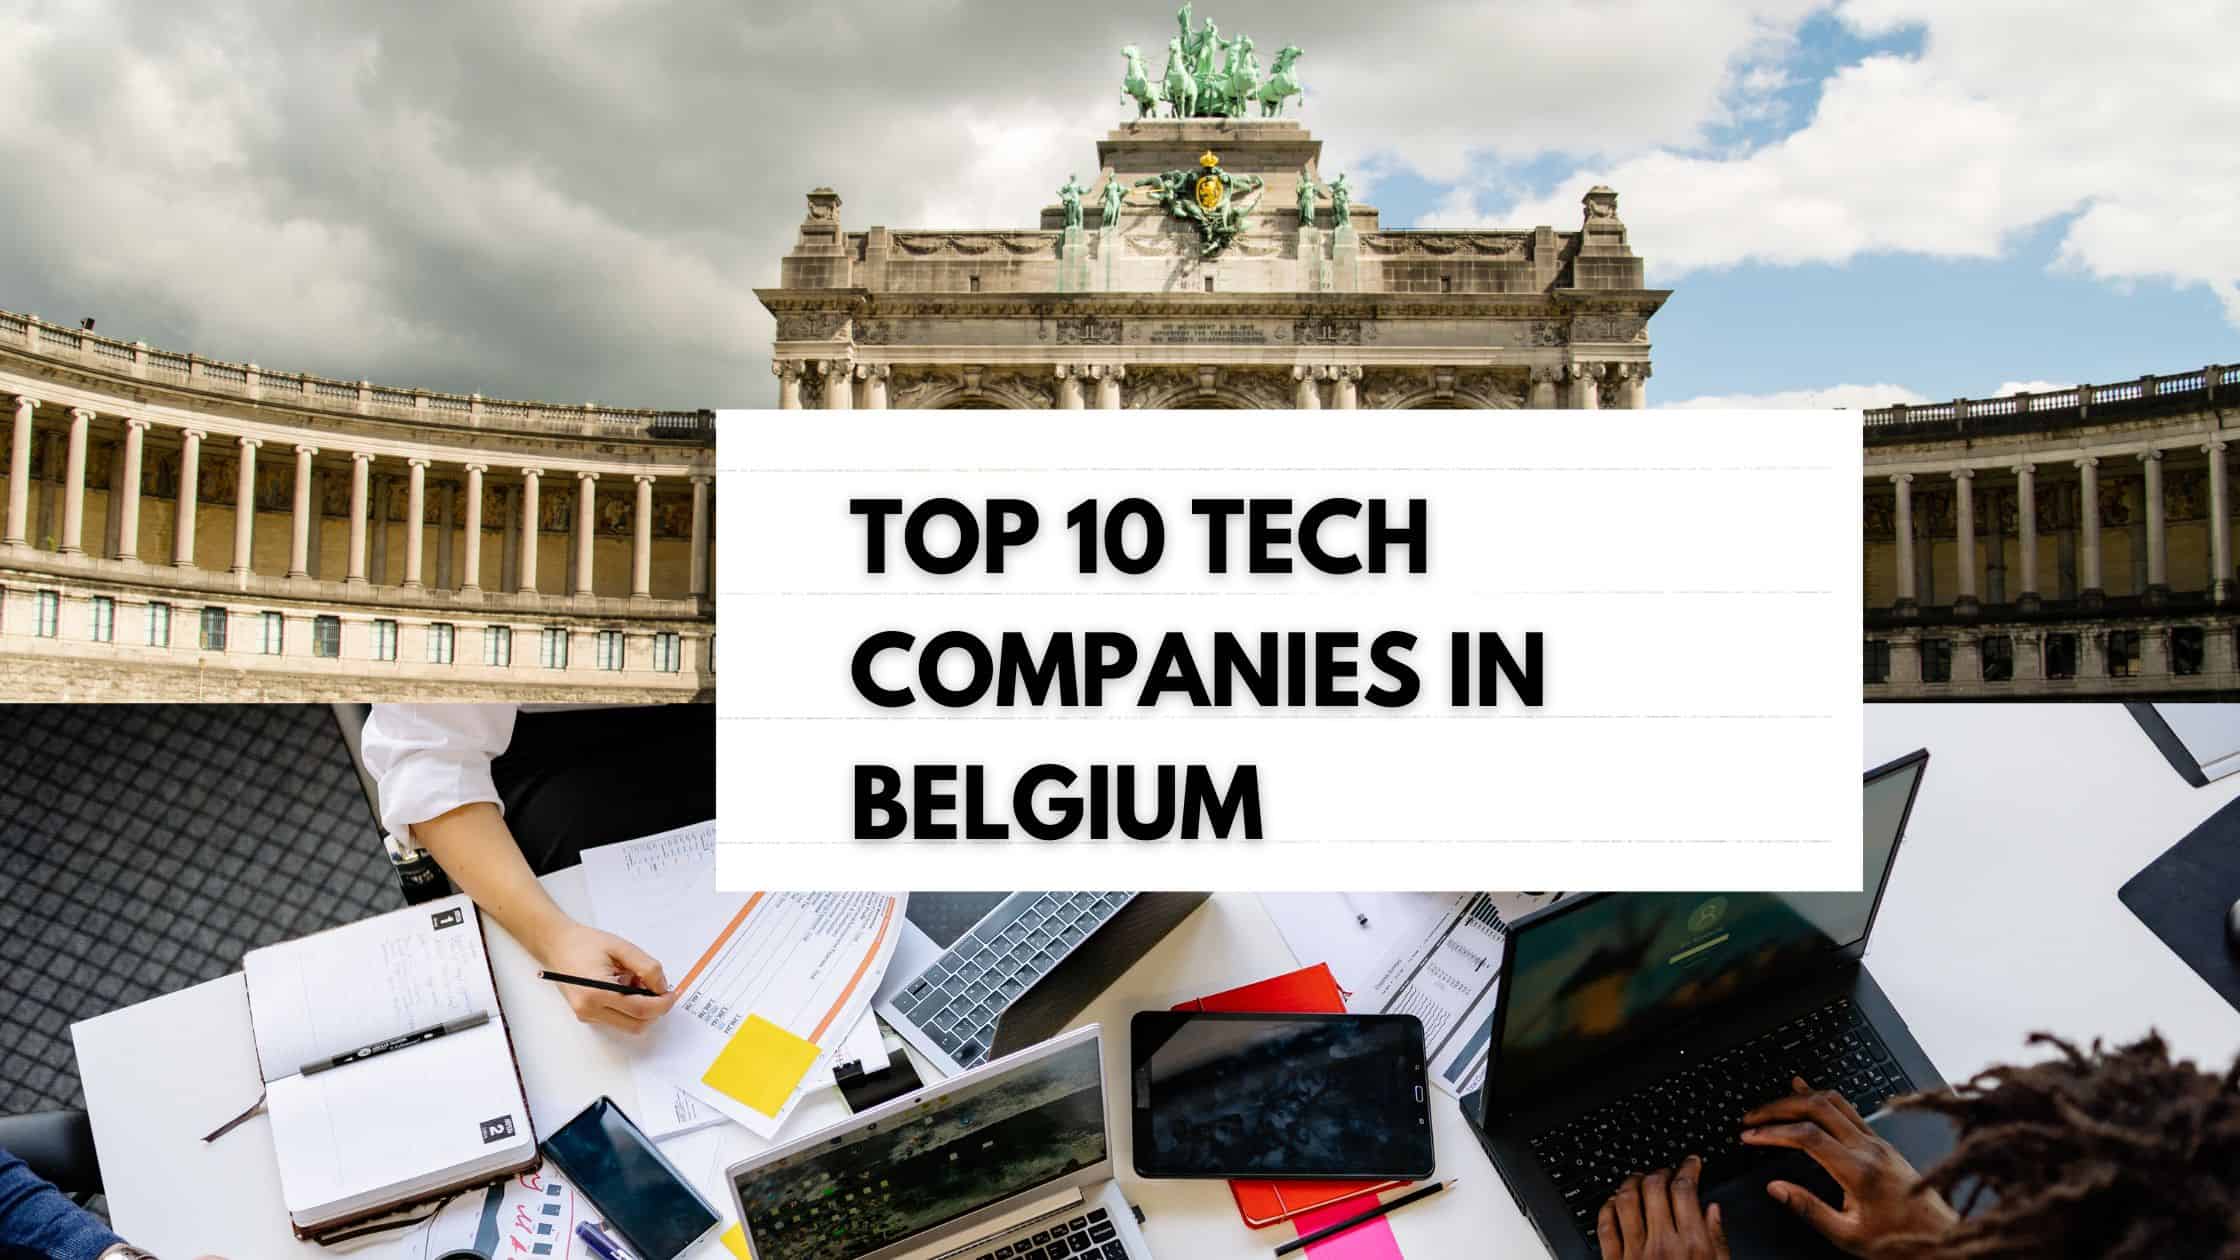 What are the top ten tech companies in Belgium? What unique factors make them unique and profitable? Read this article to get the details!